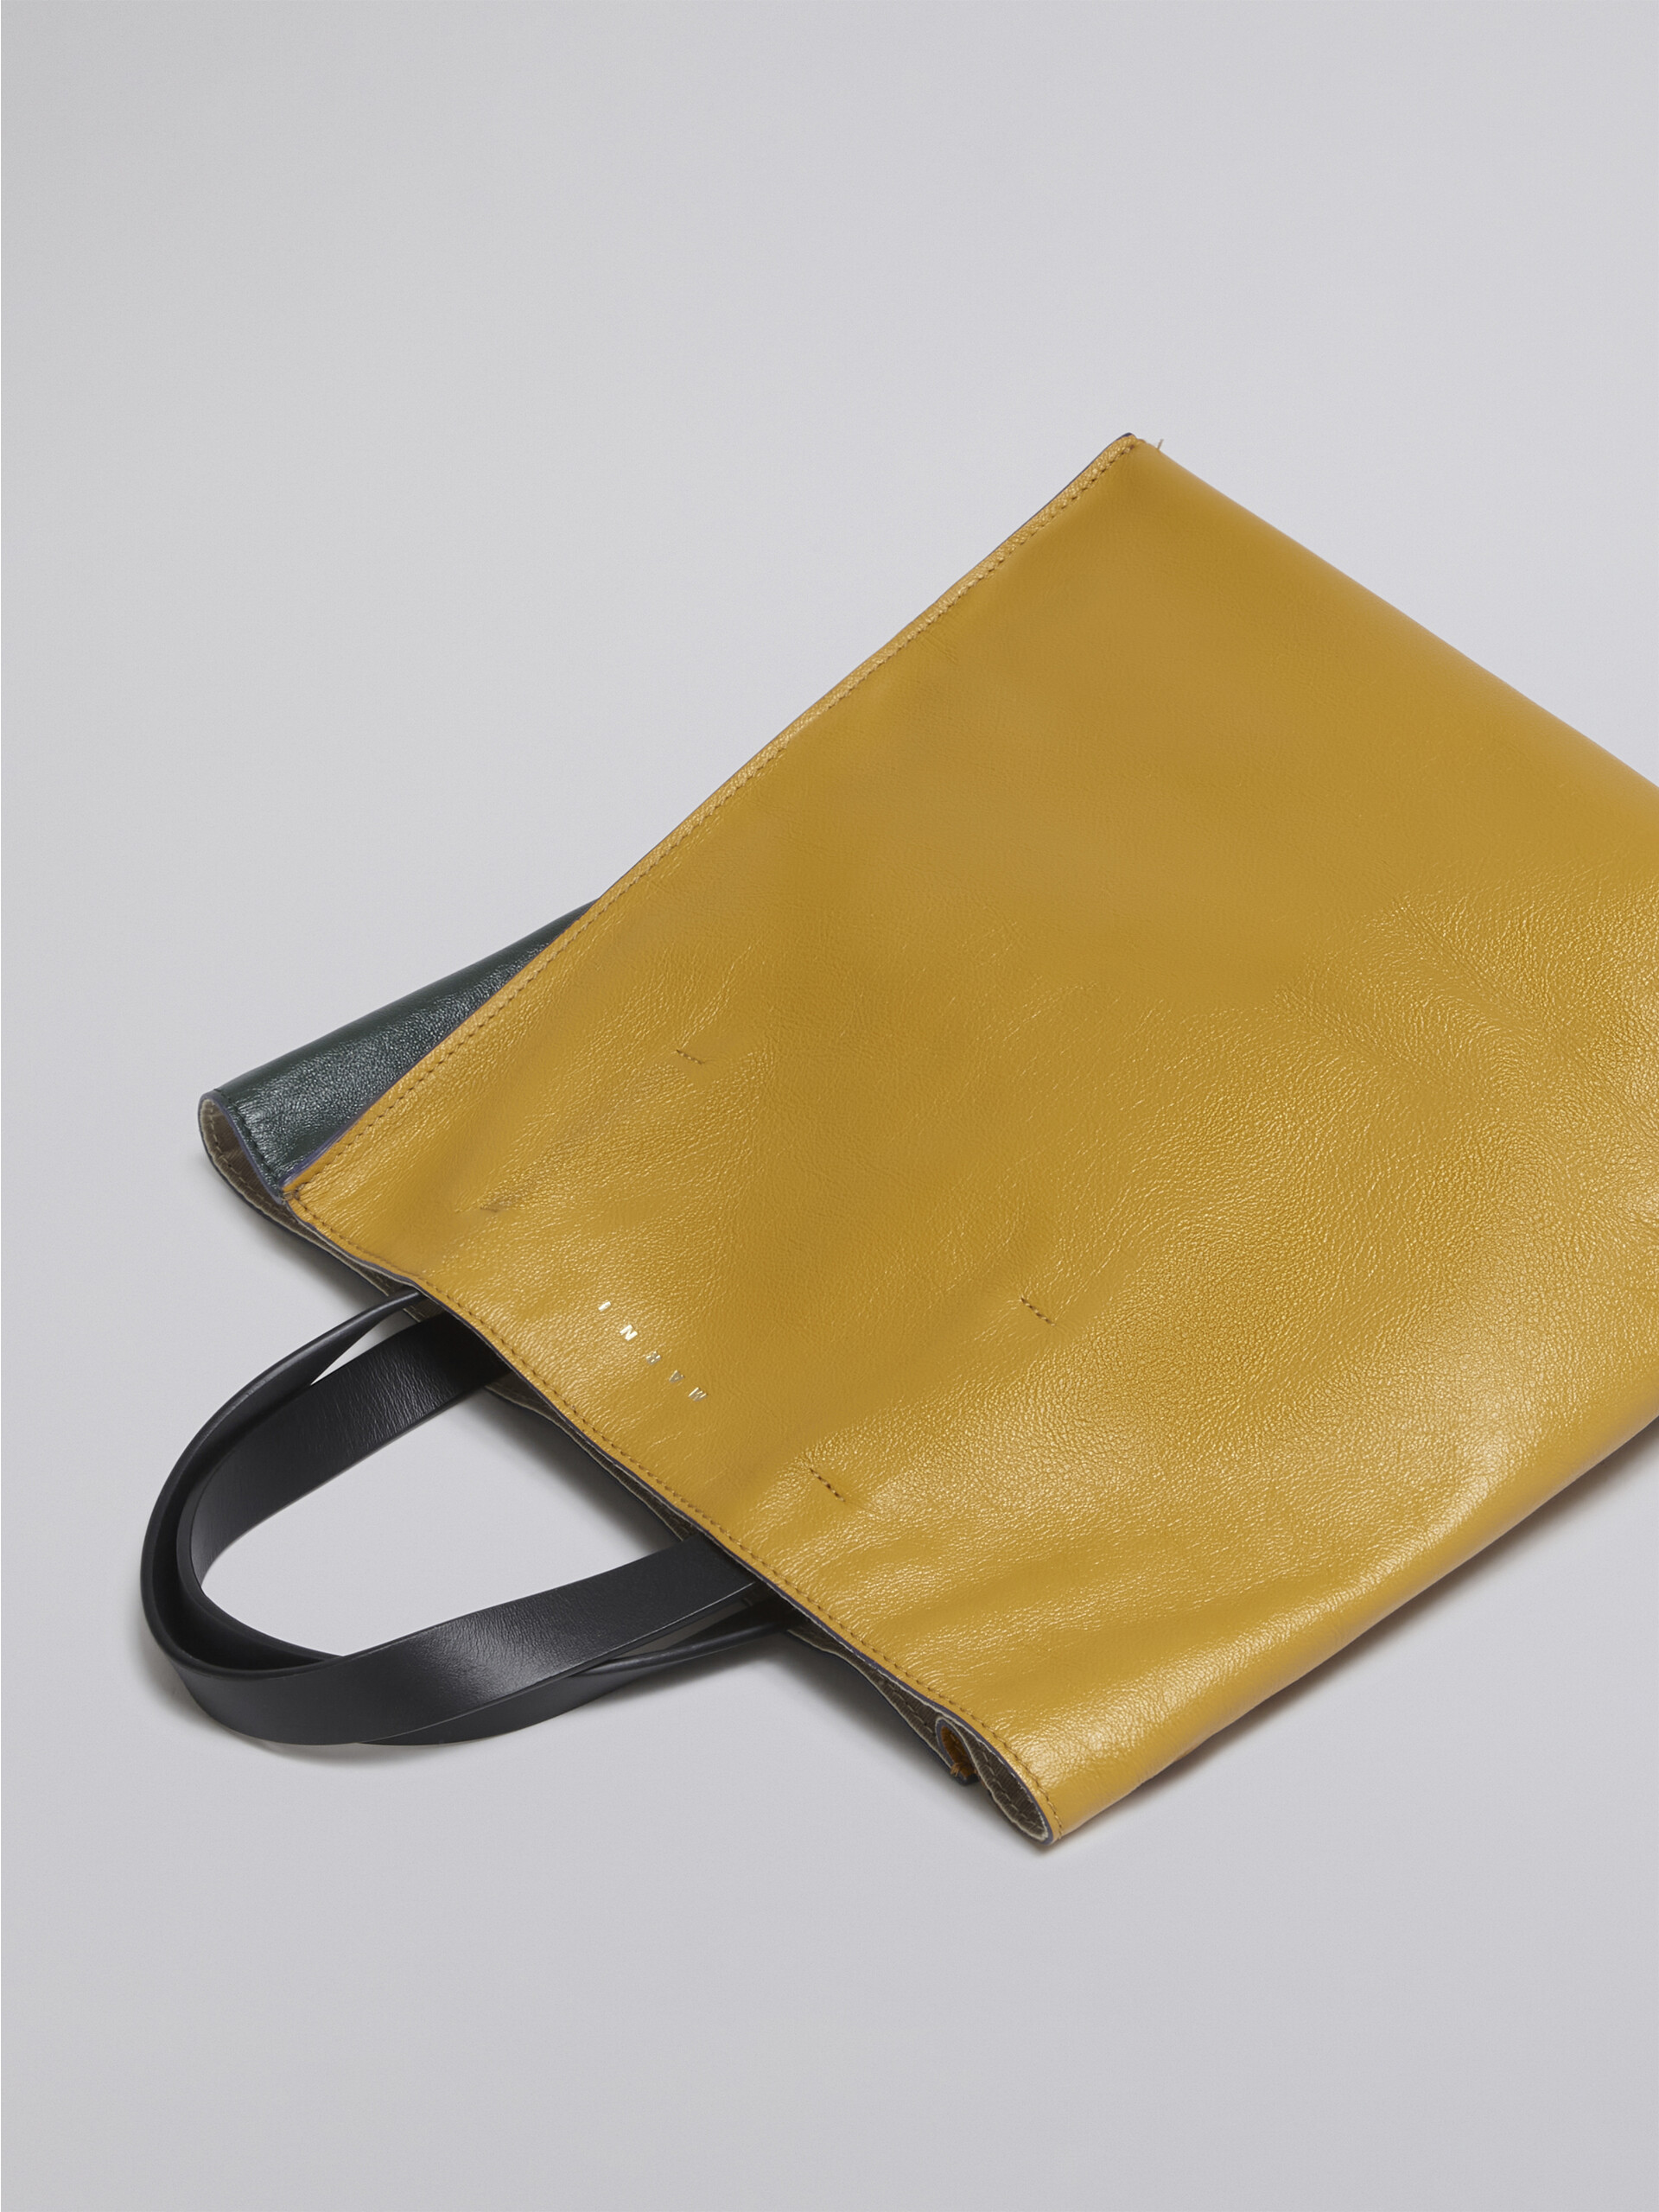 Yellow and green MUSEO SOFT bag in tumbled calfskin - Shopping Bags - Image 5